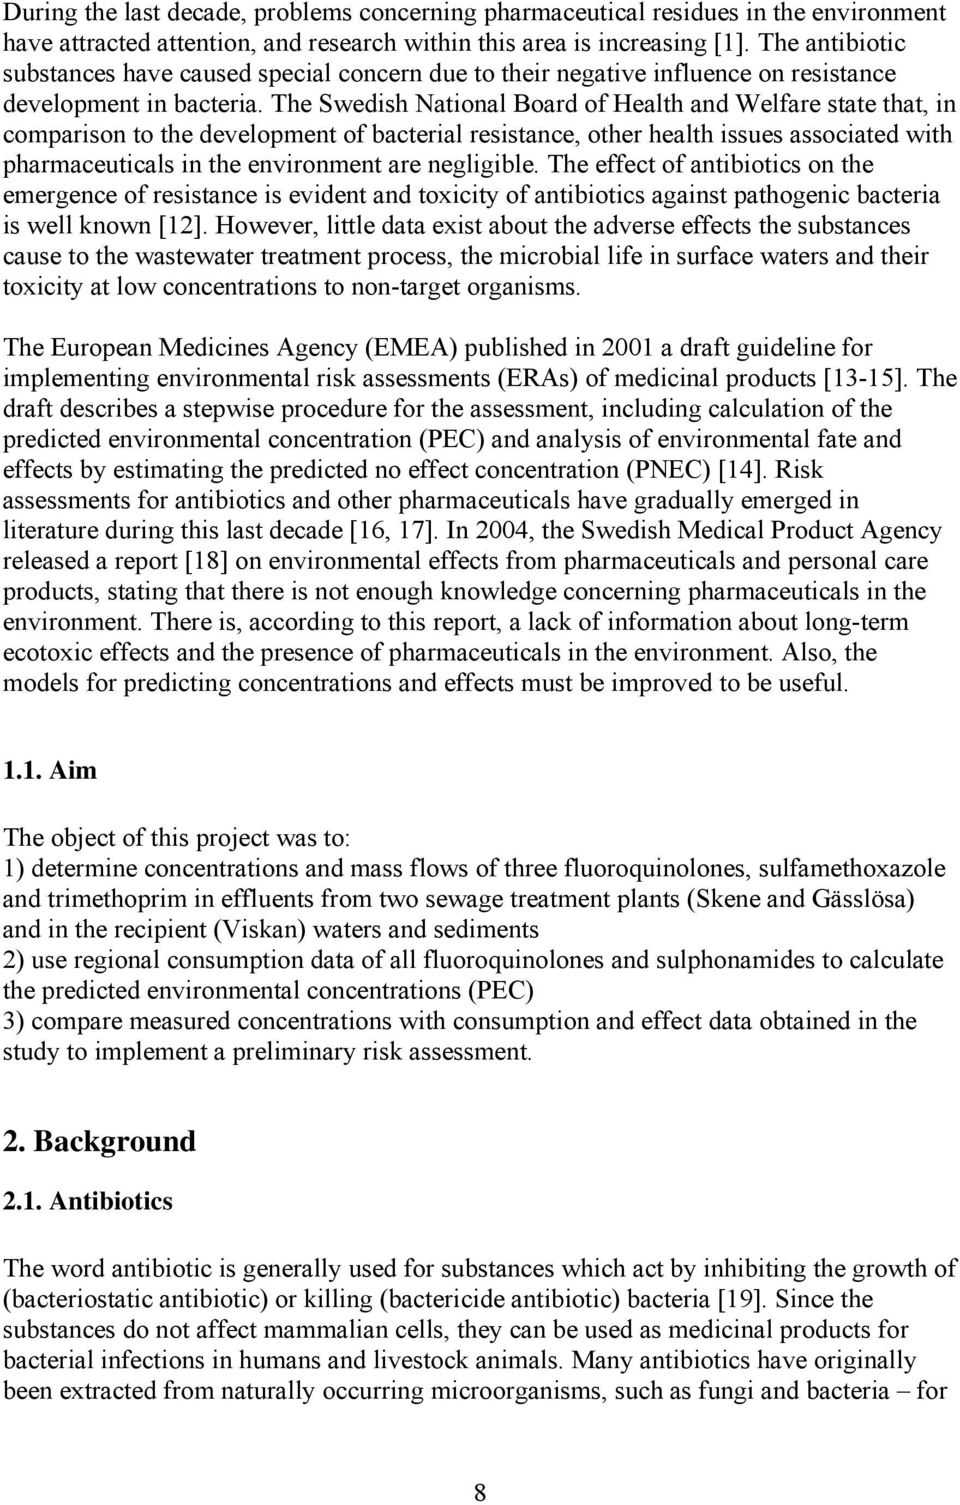 The Swedish National Board of Health and Welfare state that, in comparison to the development of bacterial resistance, other health issues associated with pharmaceuticals in the environment are